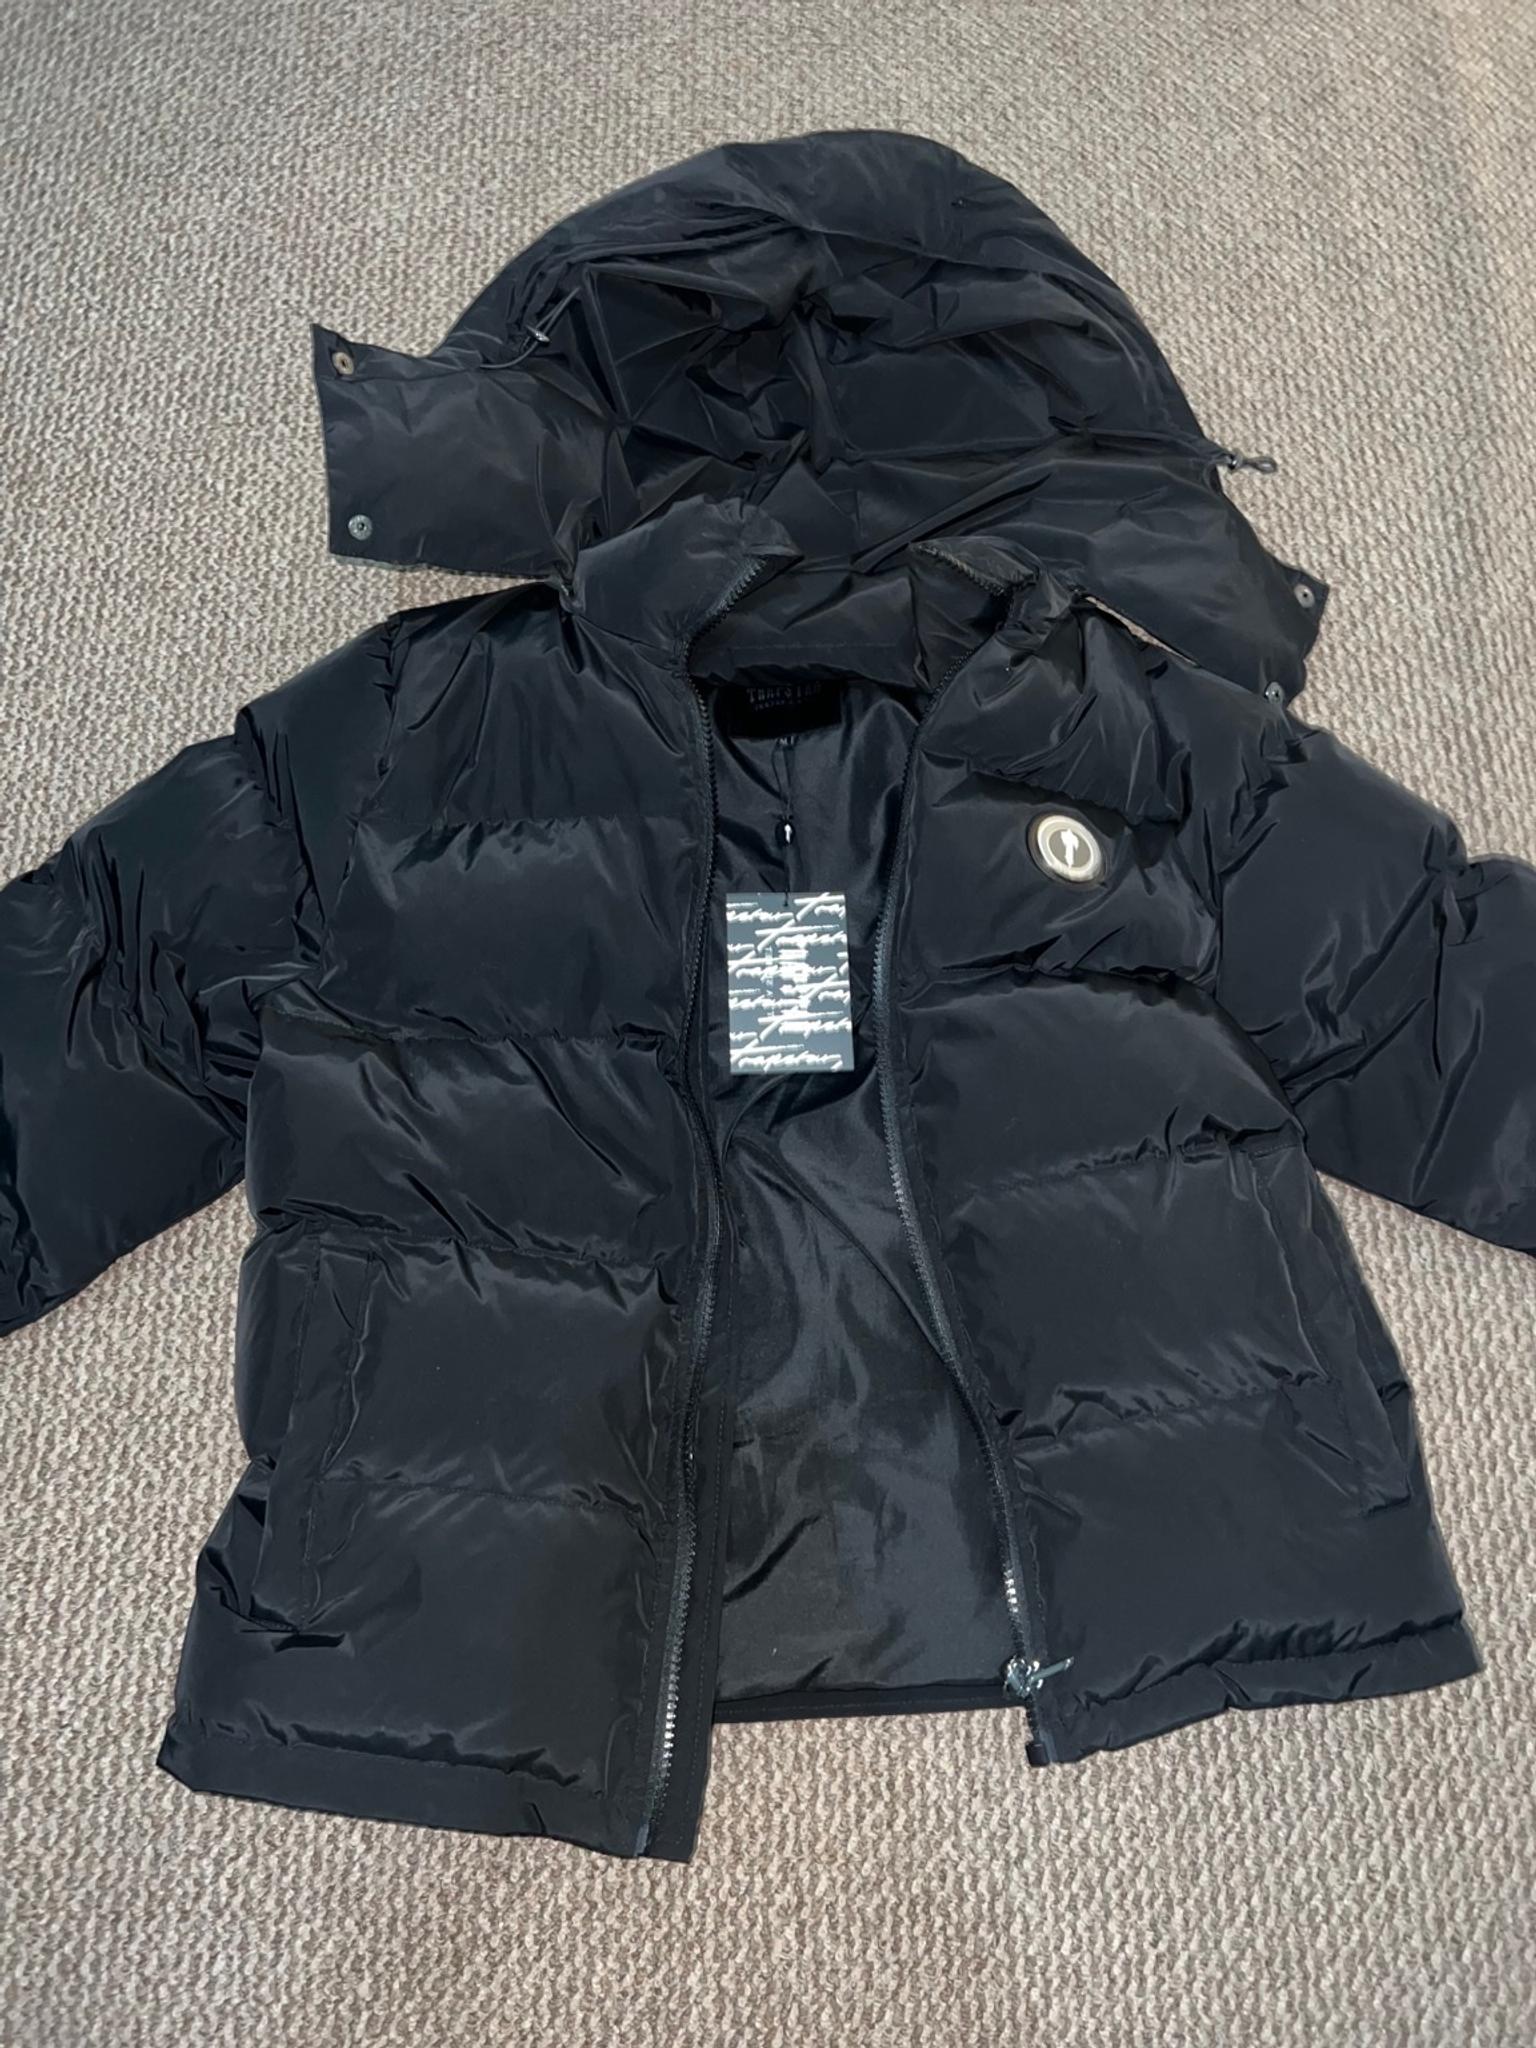 TRAPSTAR JACKET IRONGATE BLACK/GREY in LE19 Blaby for £200.00 for sale ...